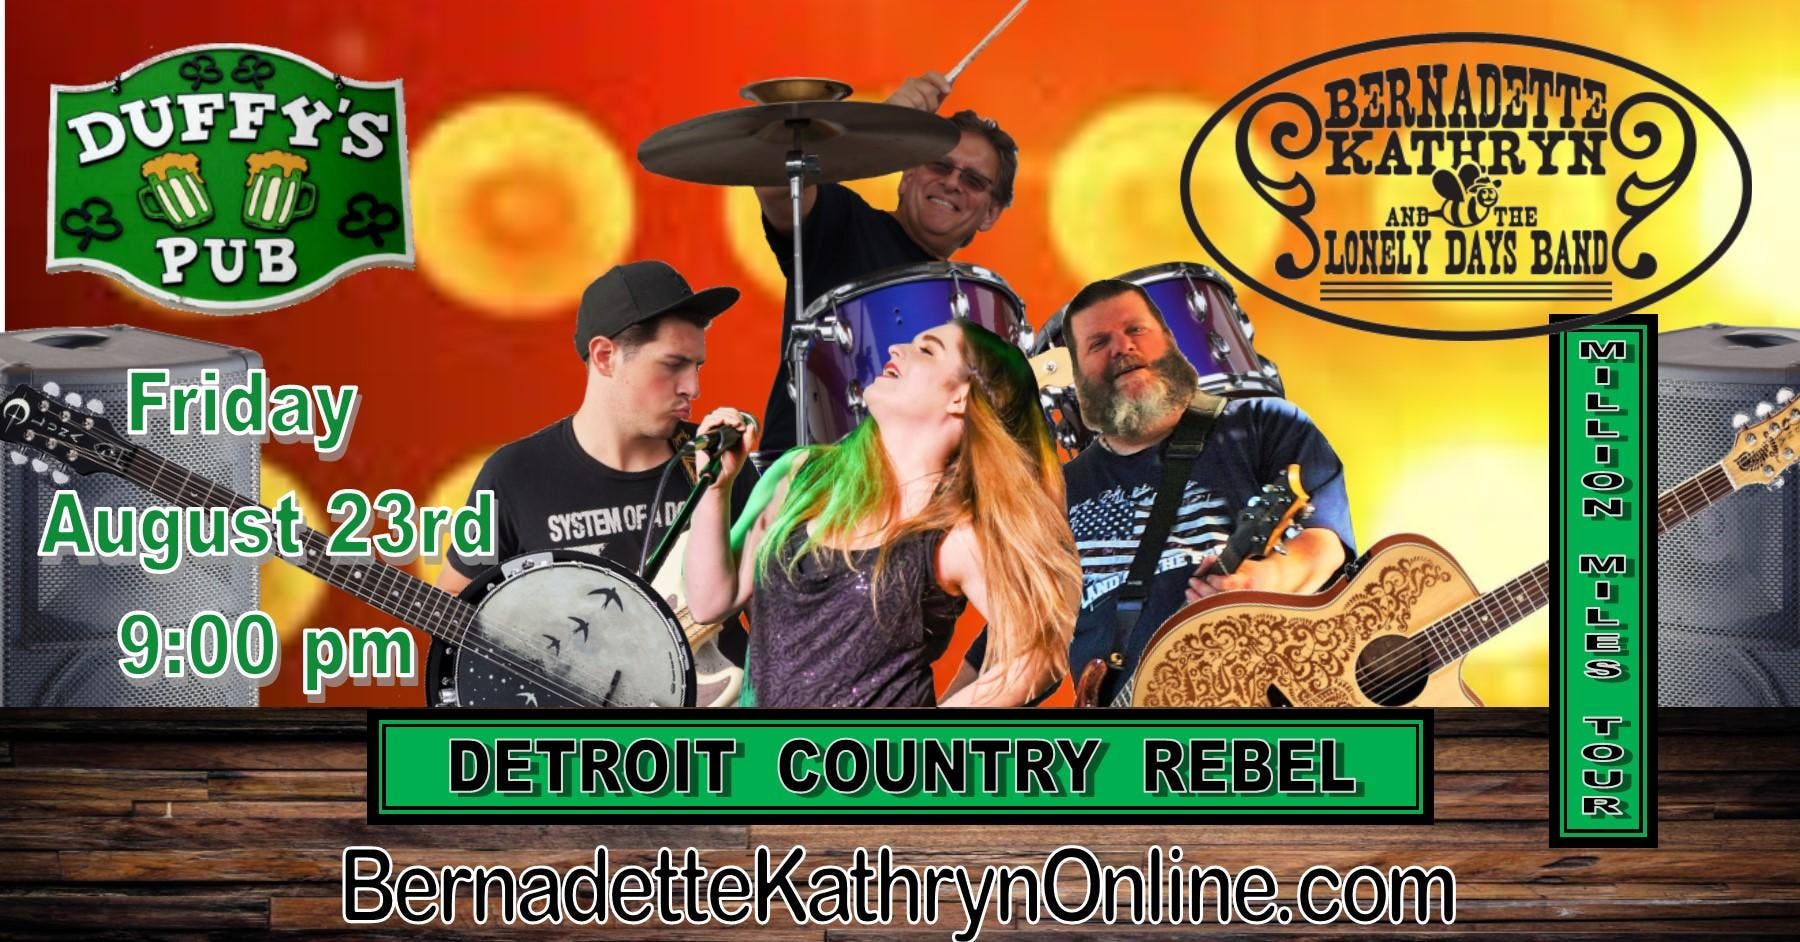 Bernadette Kathryn and the Lonely Days Band RETURNS to Duffy's Pub